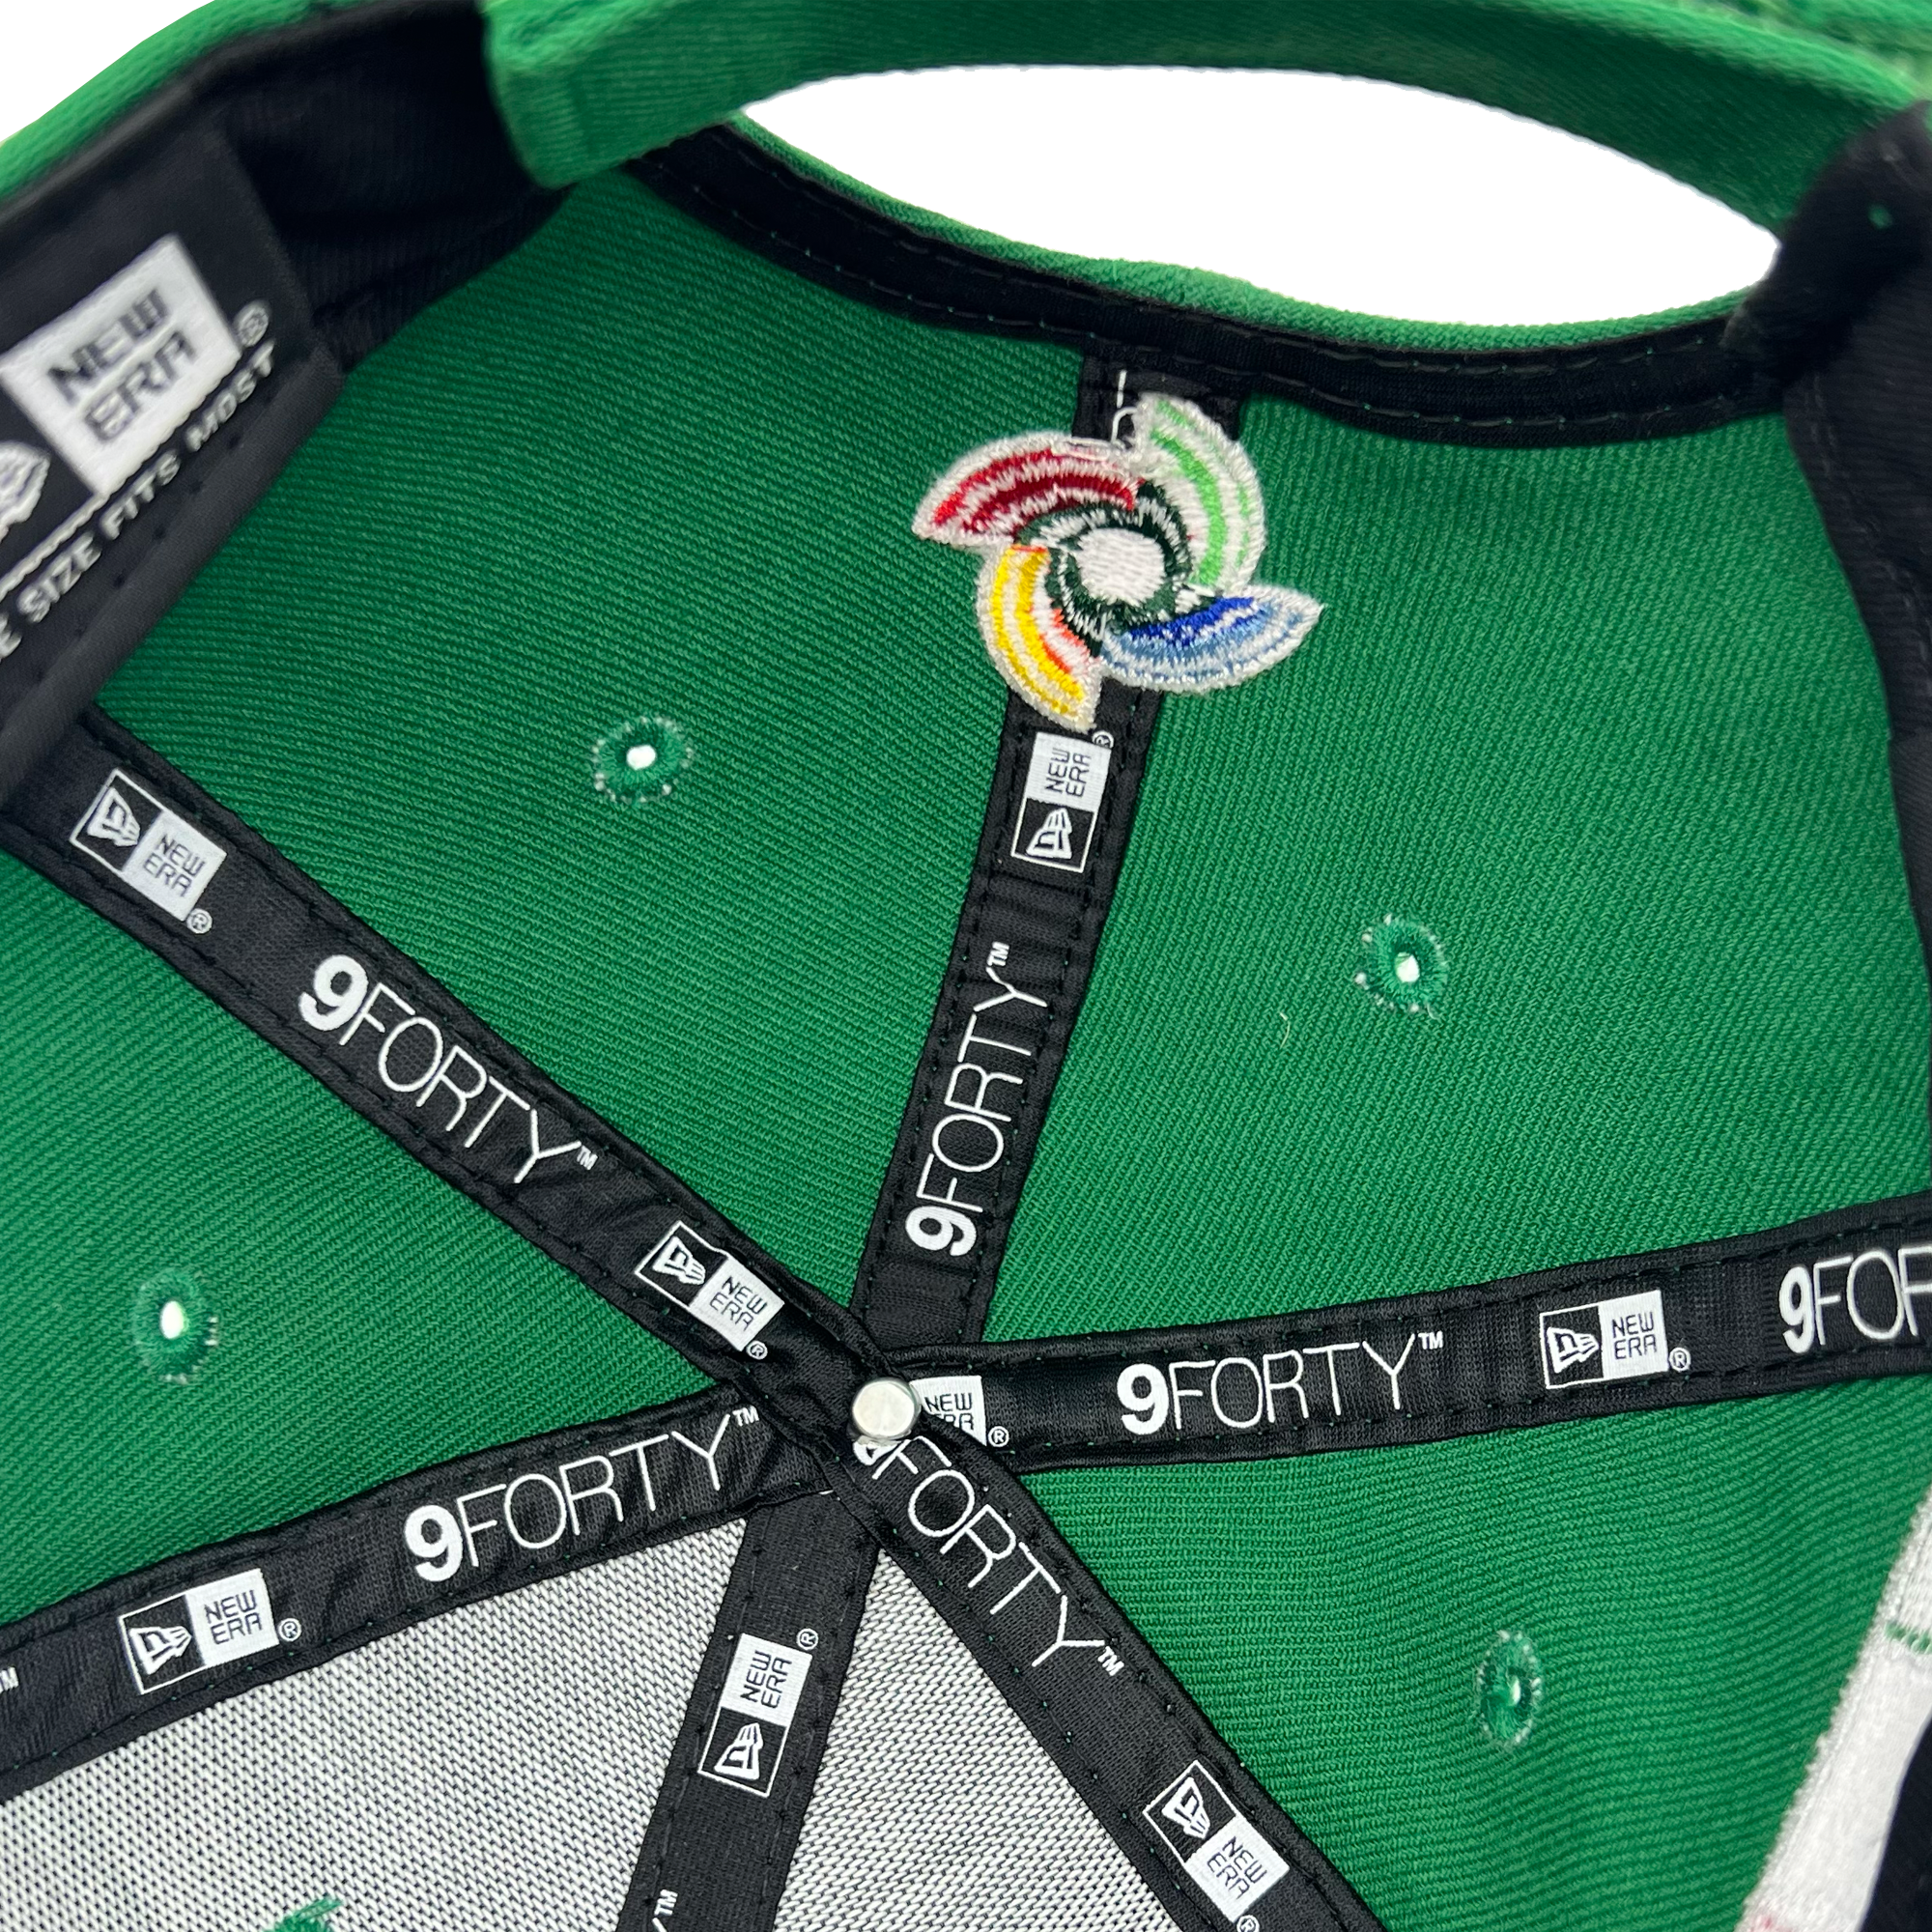 Image inside crown of a green cap with black taping with black 9FORTY taping and New Era wordmarks on repeat.